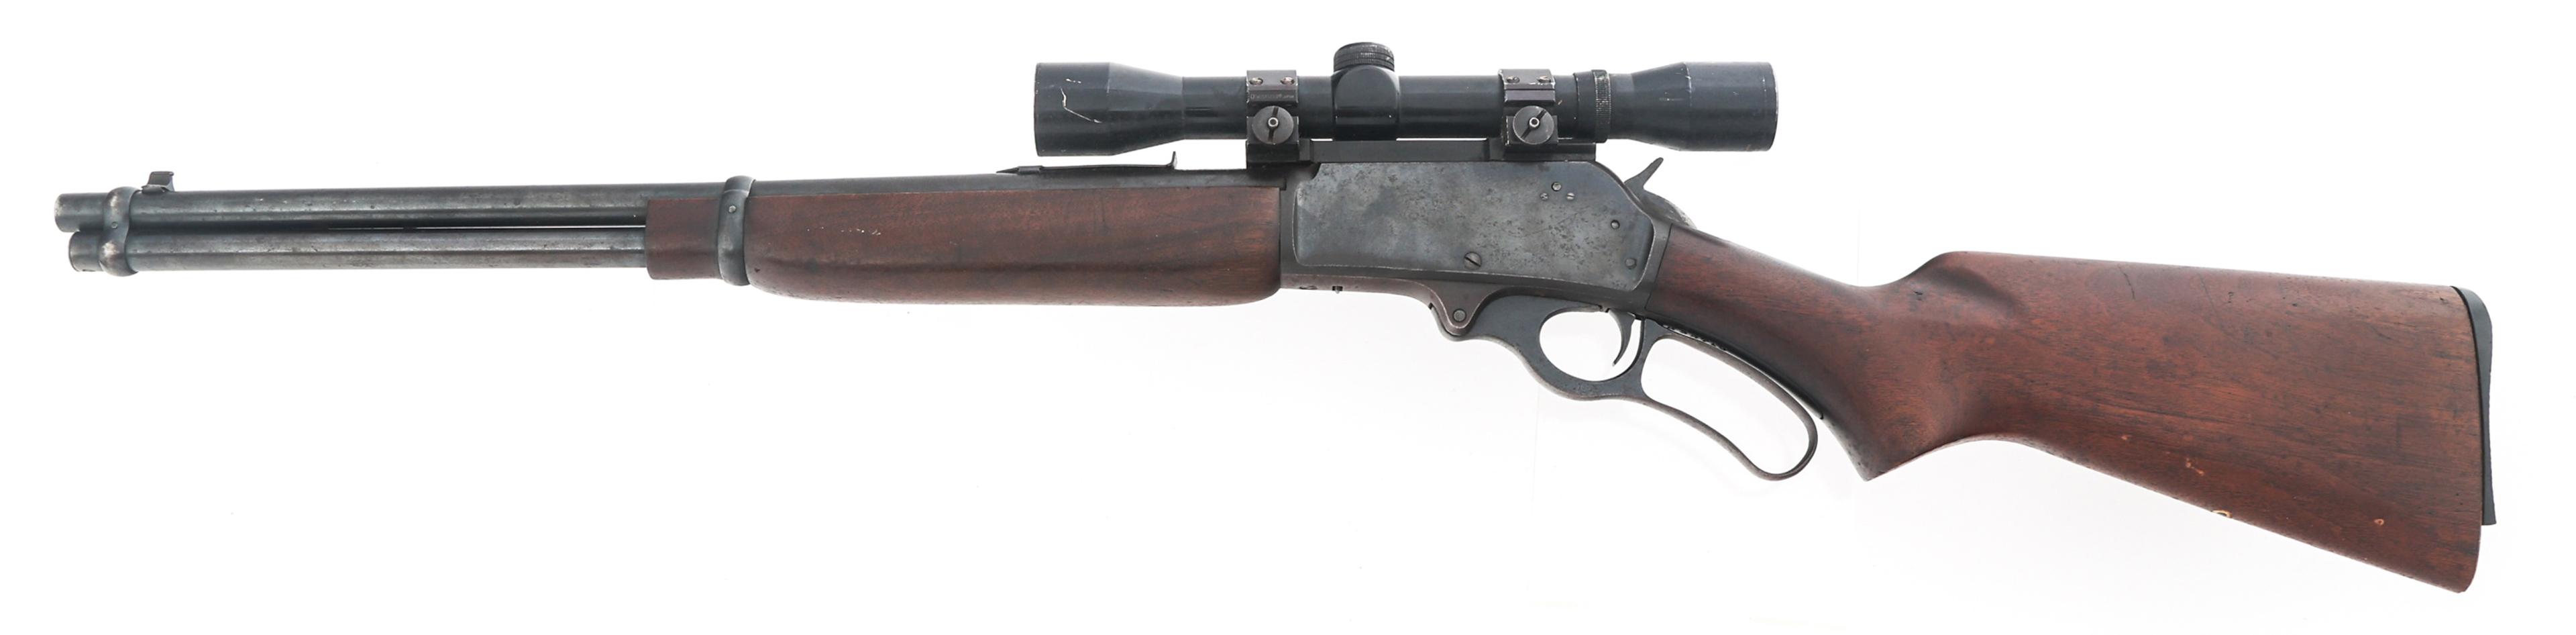 MARLIN MODEL 336R .30-30 CAL LEVER ACTION RIFLE